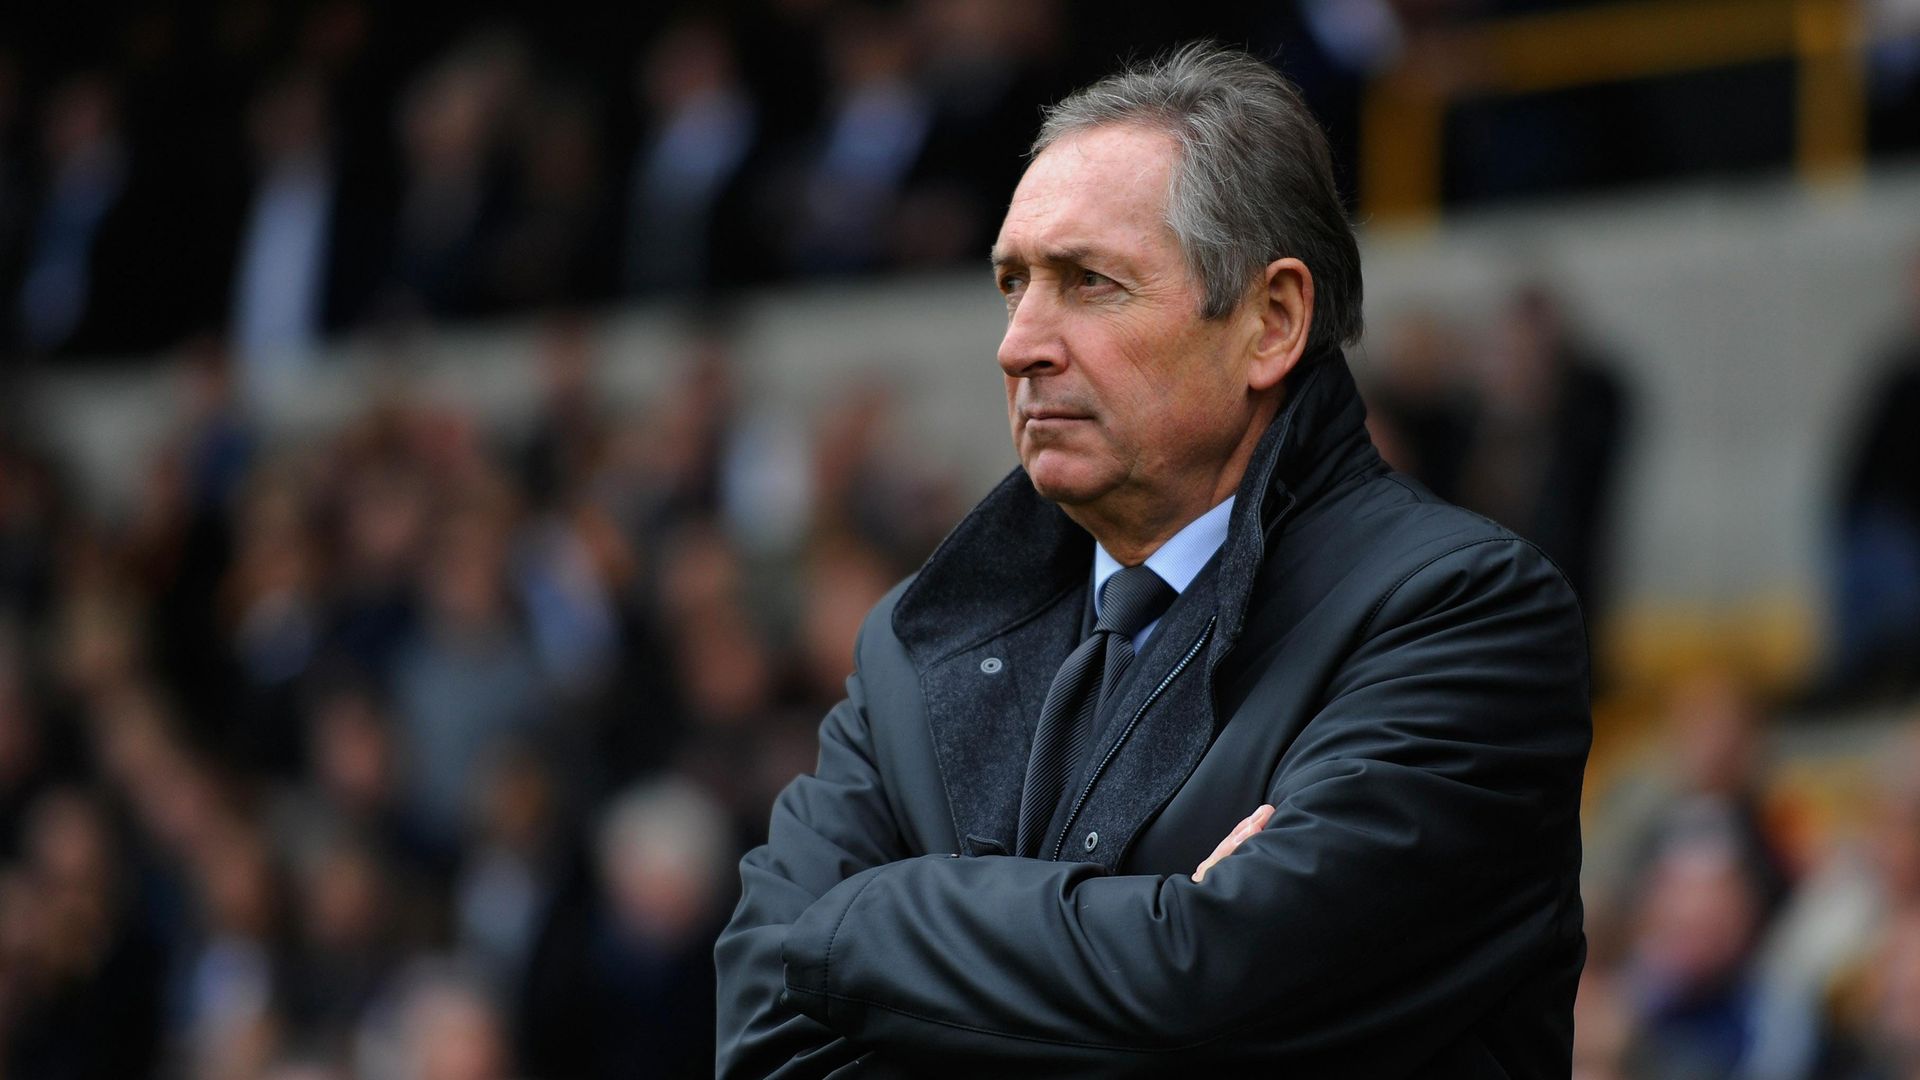 Former football manager Gérard Houllier (question five) - Credit: Getty Images